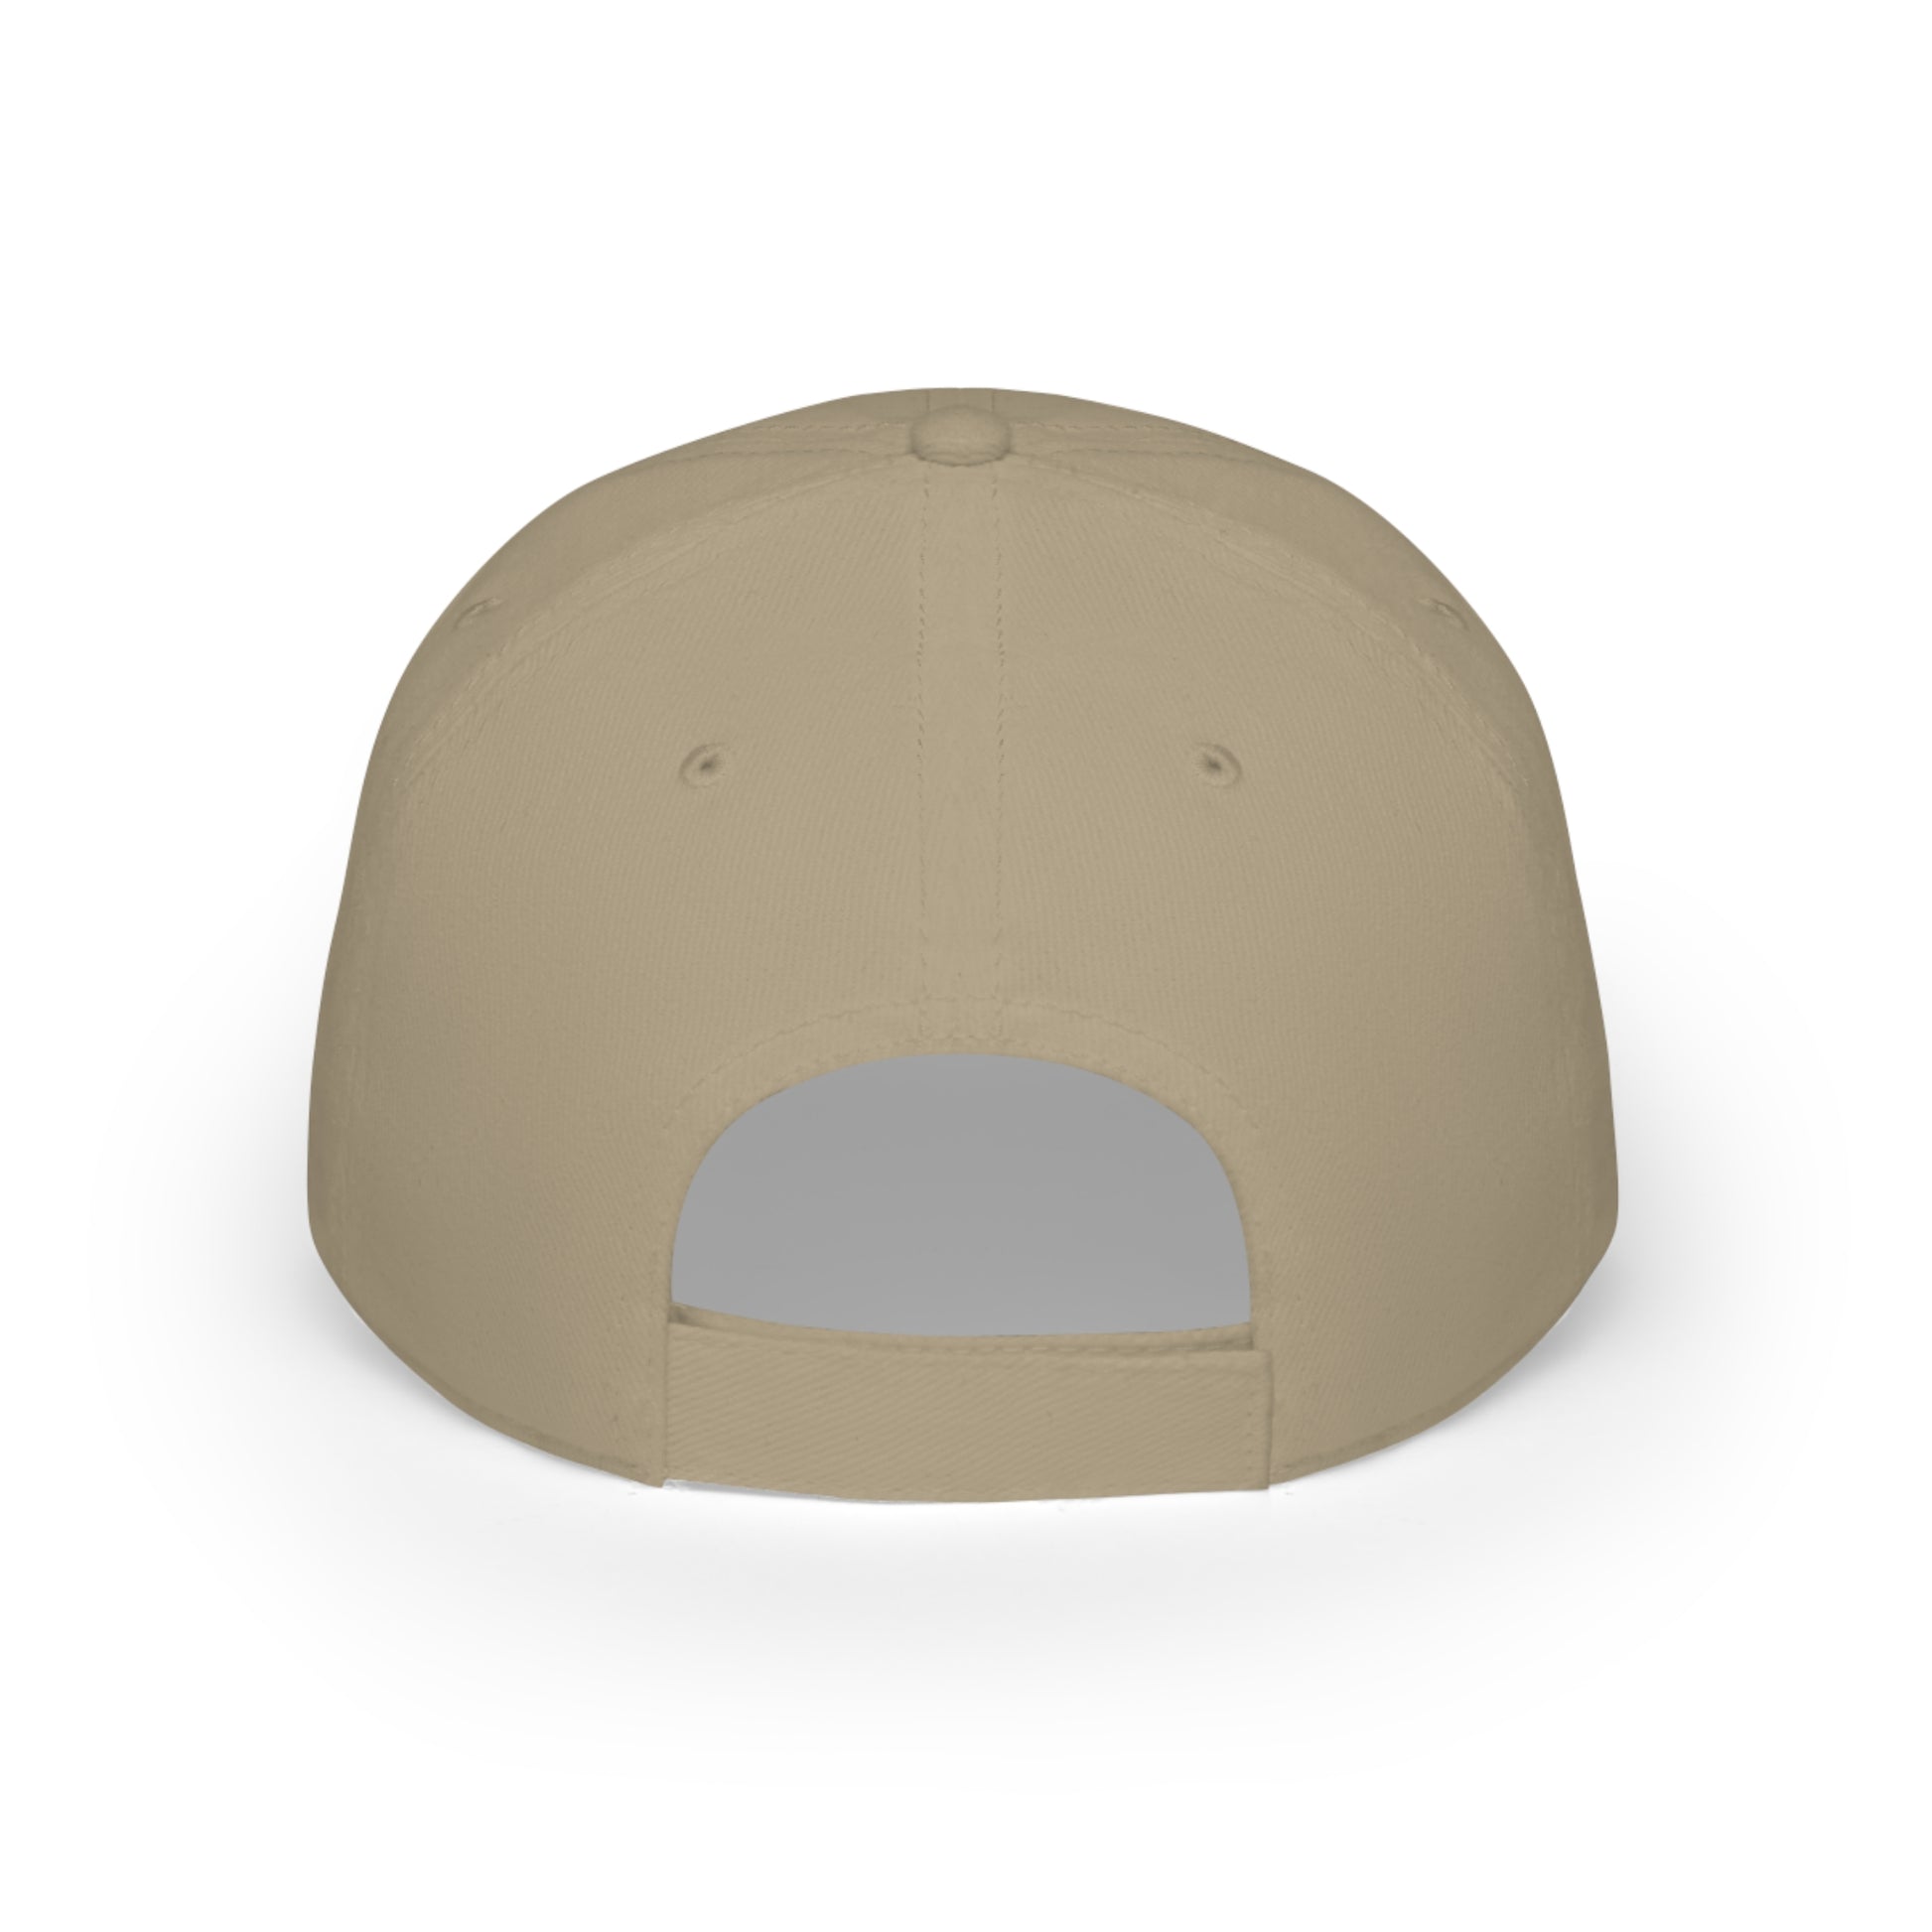 Thrashed Off-Road King Of The Mountain Hat - Mid-Atlantic Off-Roading